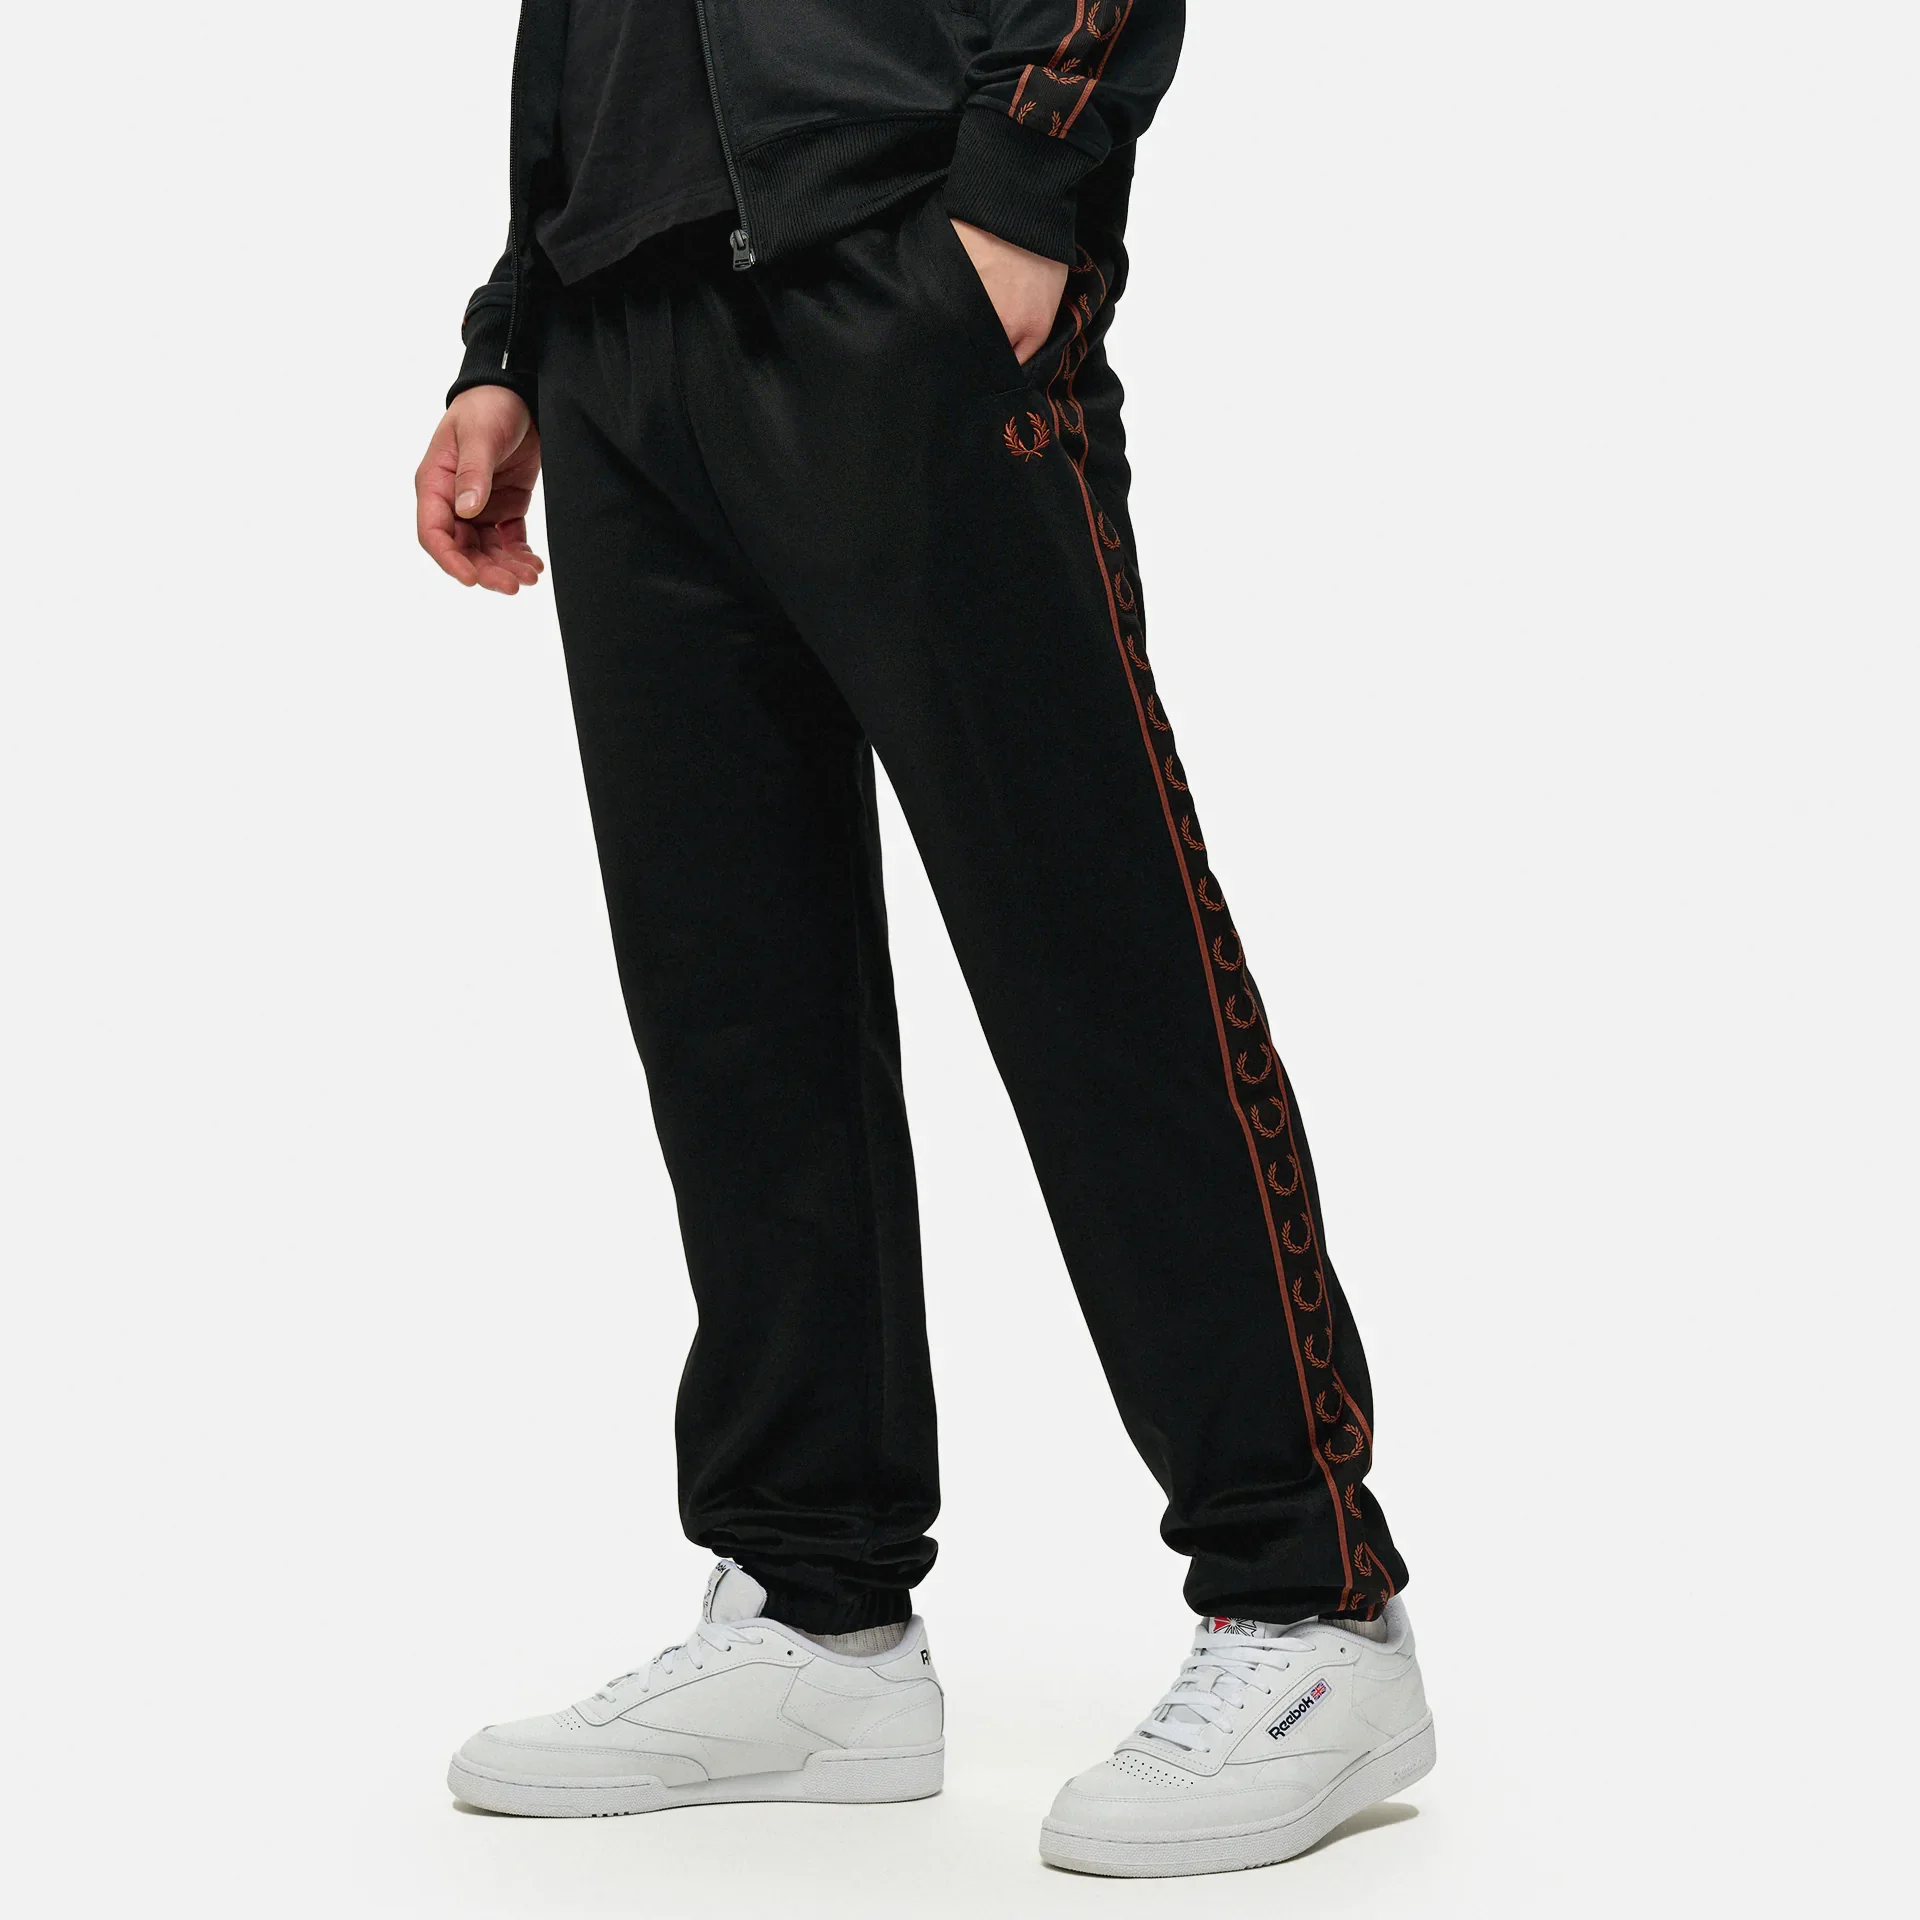 Fred Perry Seasonal Taped Track Pant Black/Whisky Brown